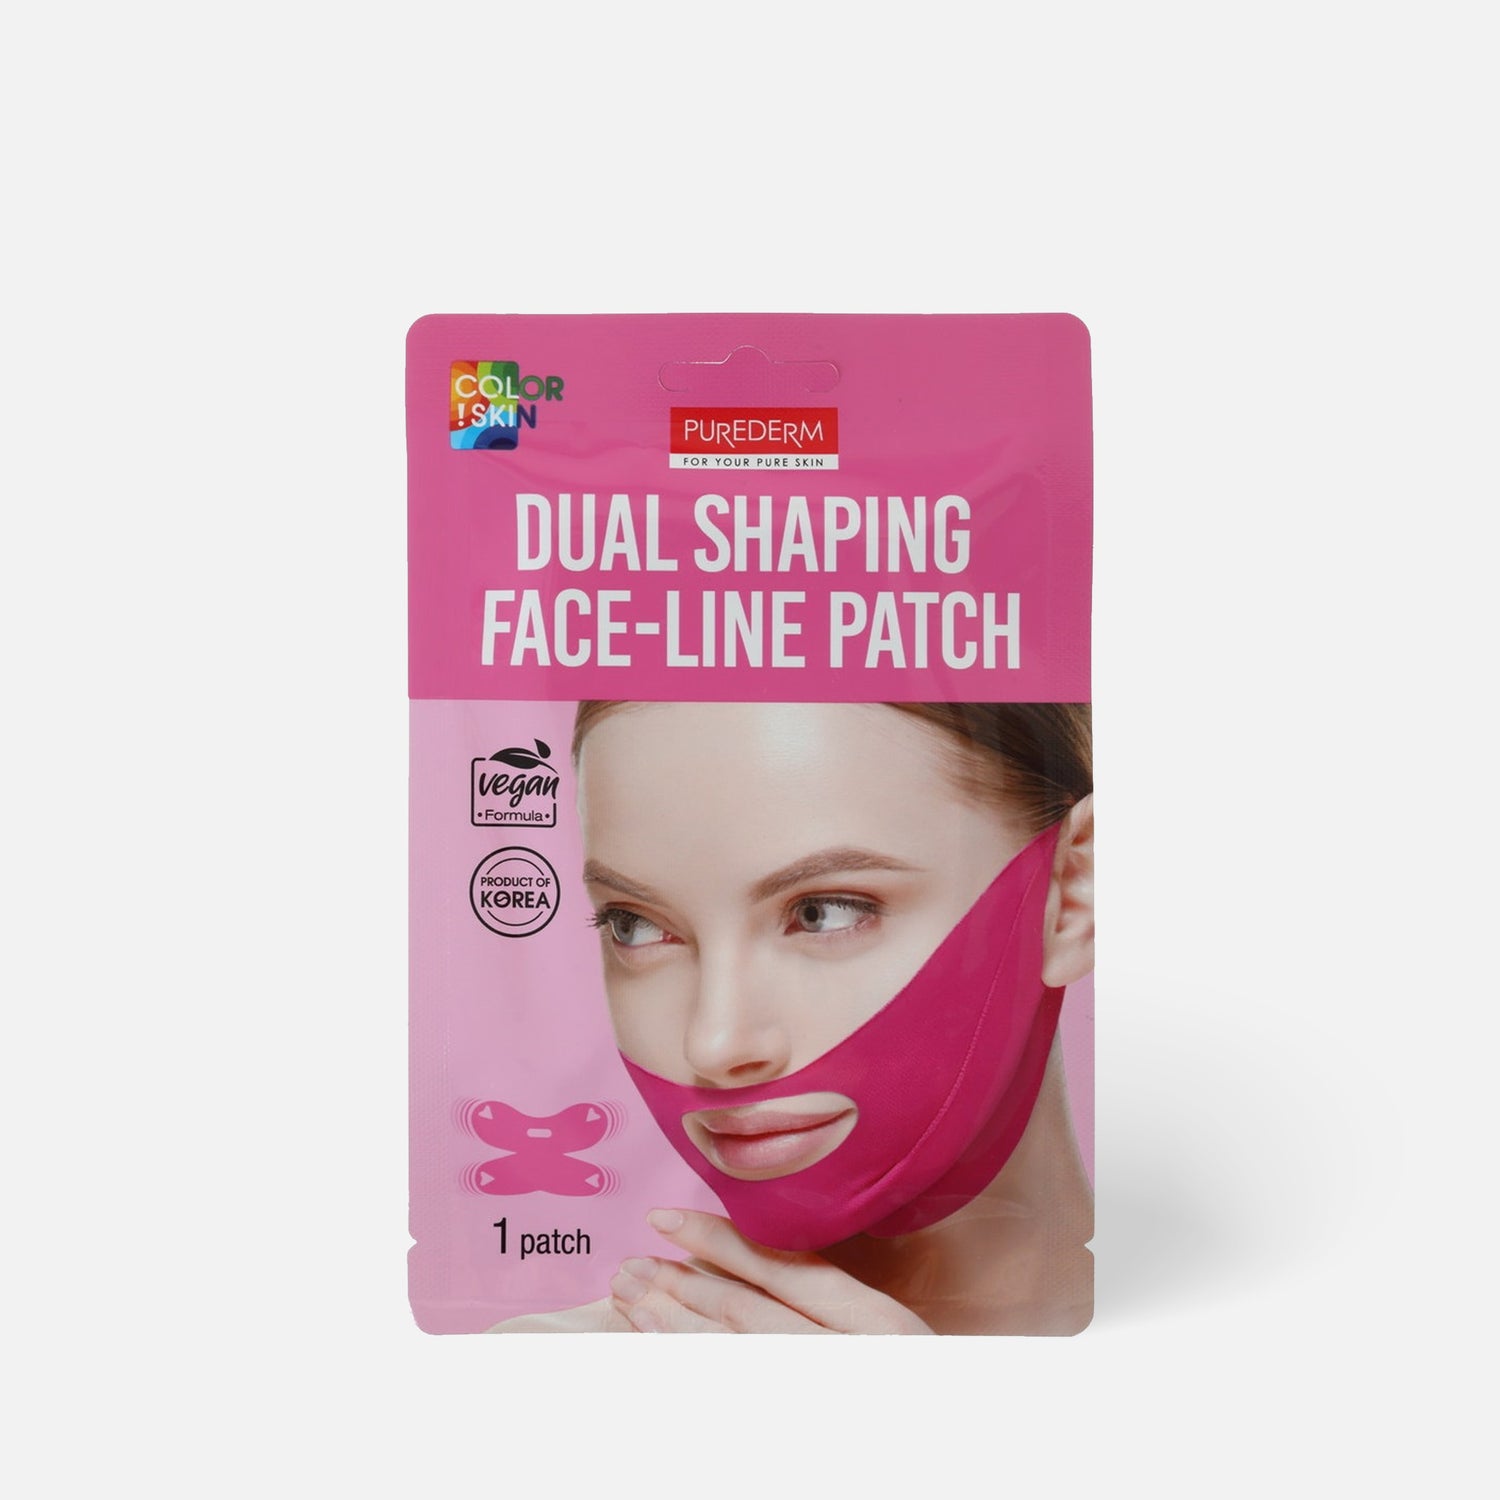 PUREDERM Dual Shaping Face line Patch